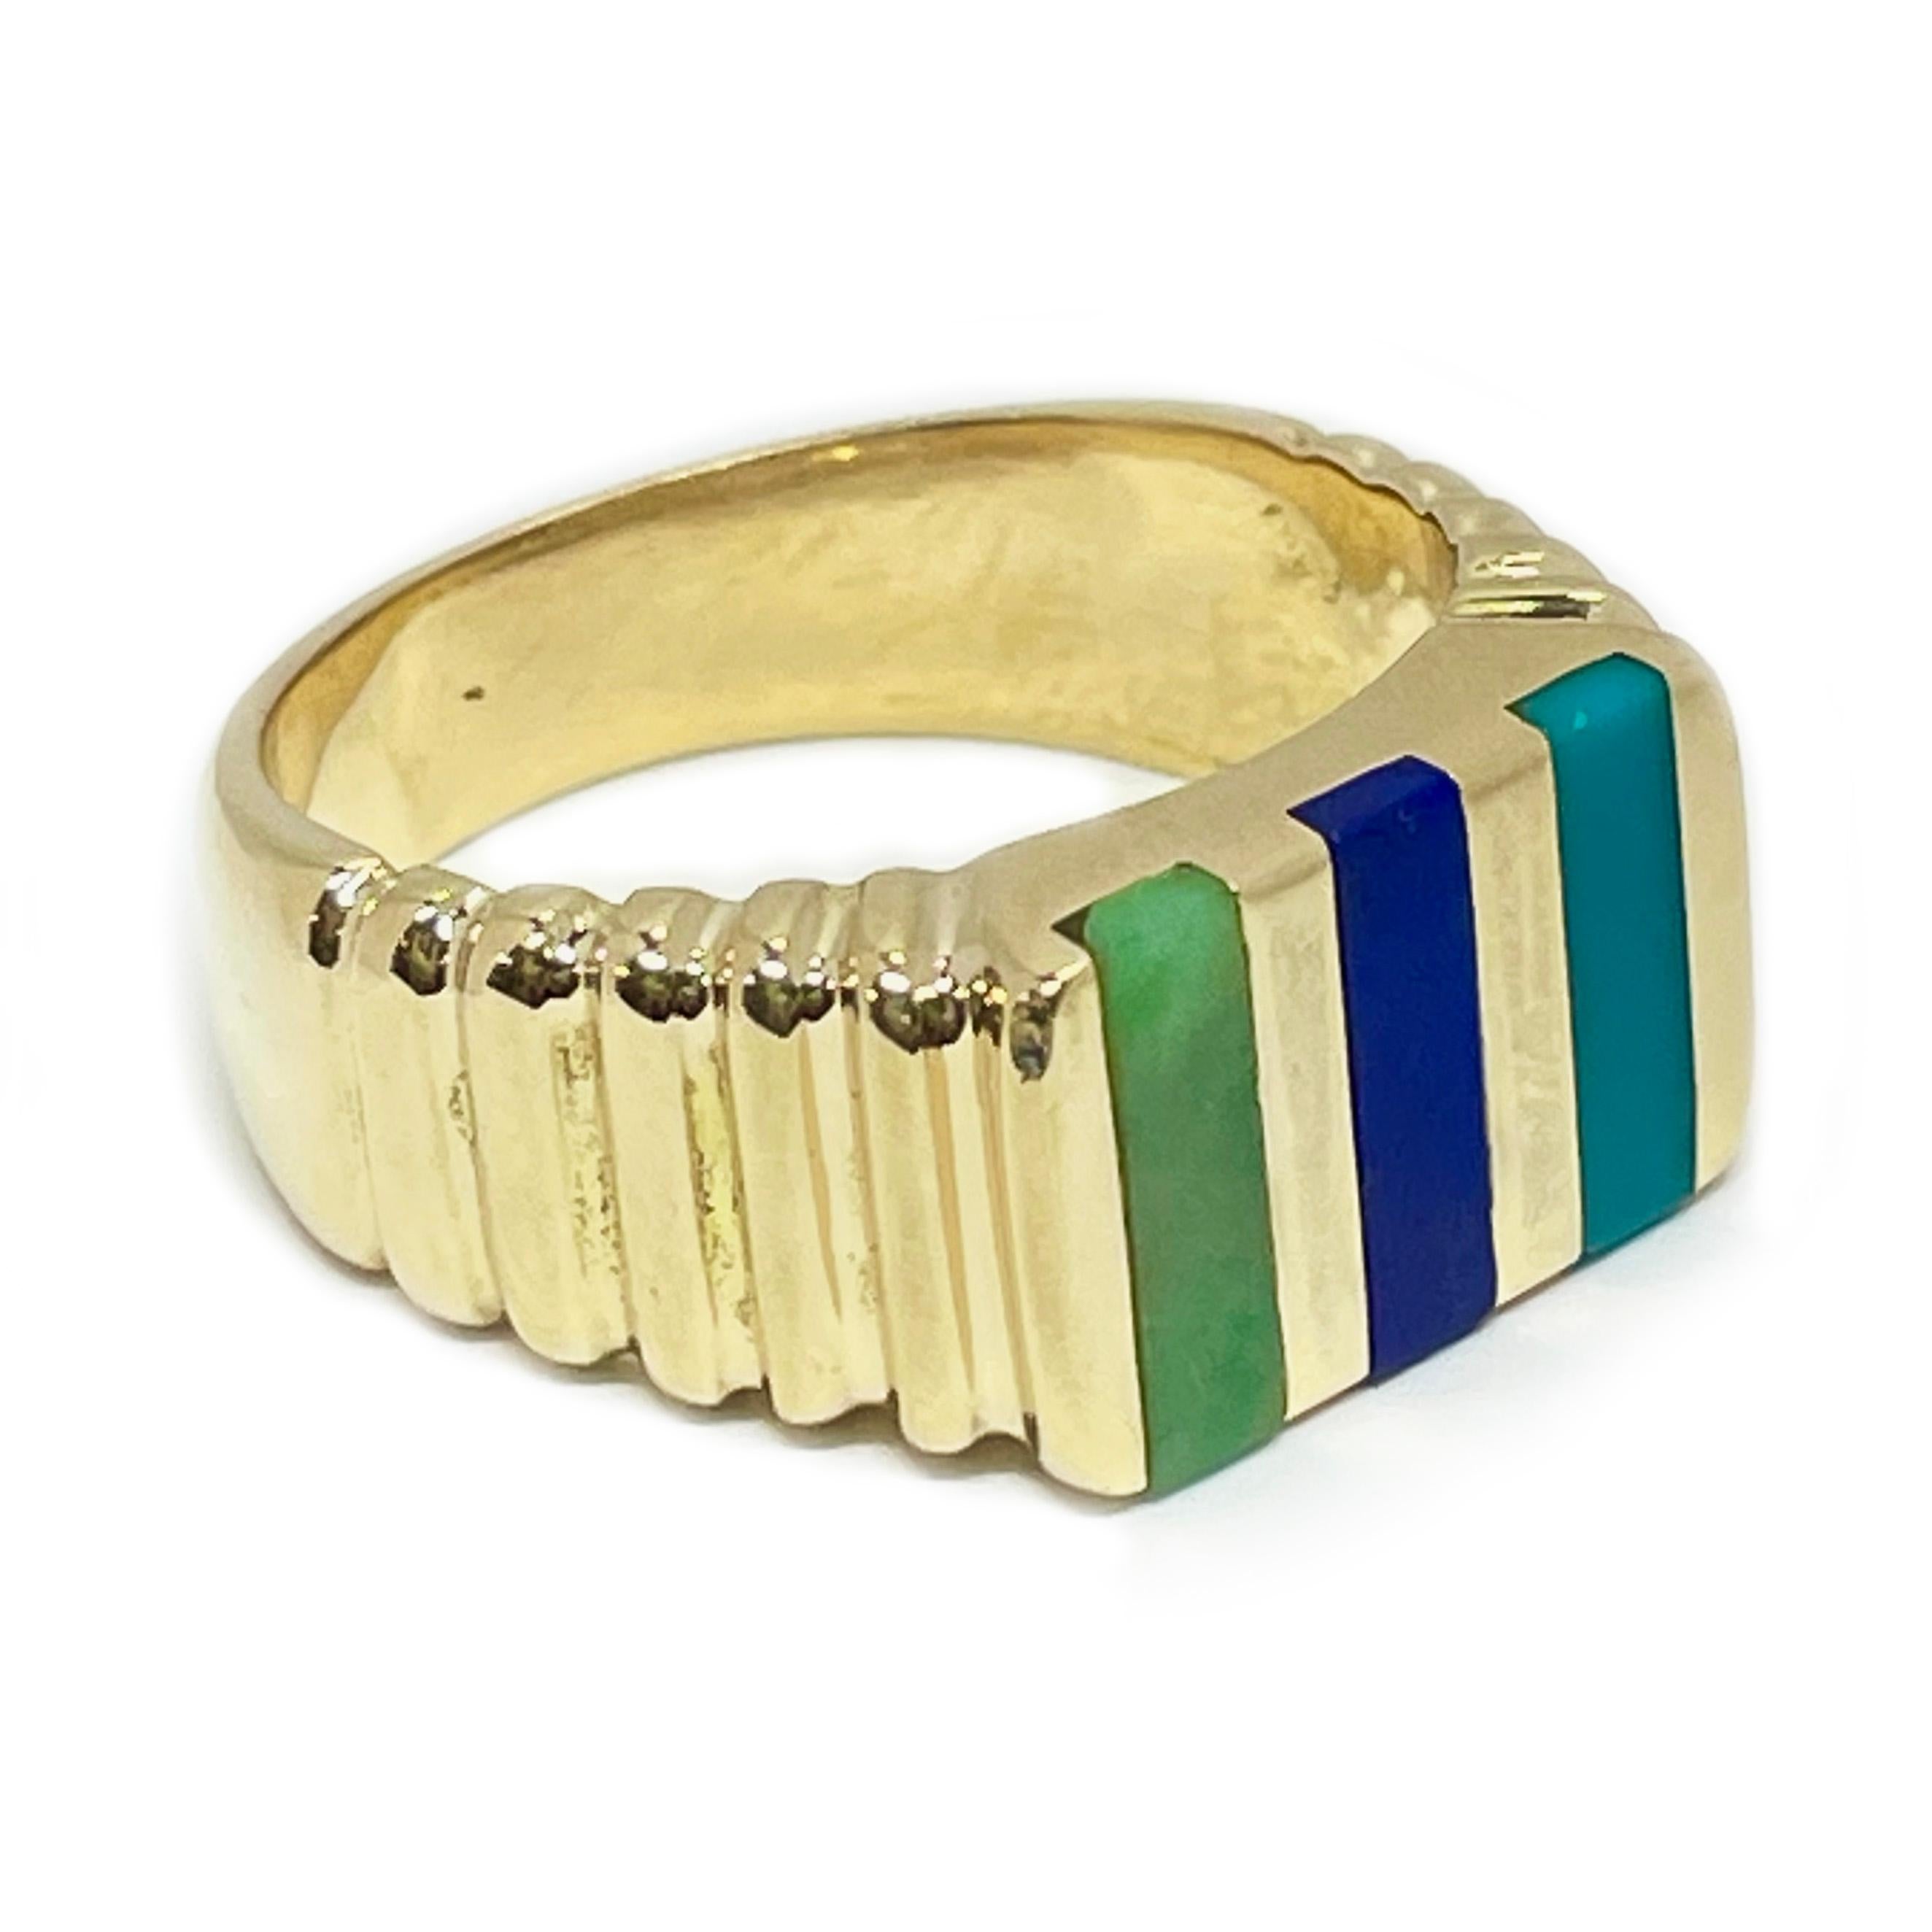 14 Karat Yellow Gold Turquoise, Lapis Lazuli, and green Jade ring. The ring has ridges on about half of the upper shank and a flat top with rectangular inlays of a rich colored turquoise, a vivid lapis lazuli, and a medium green jade. The smooth